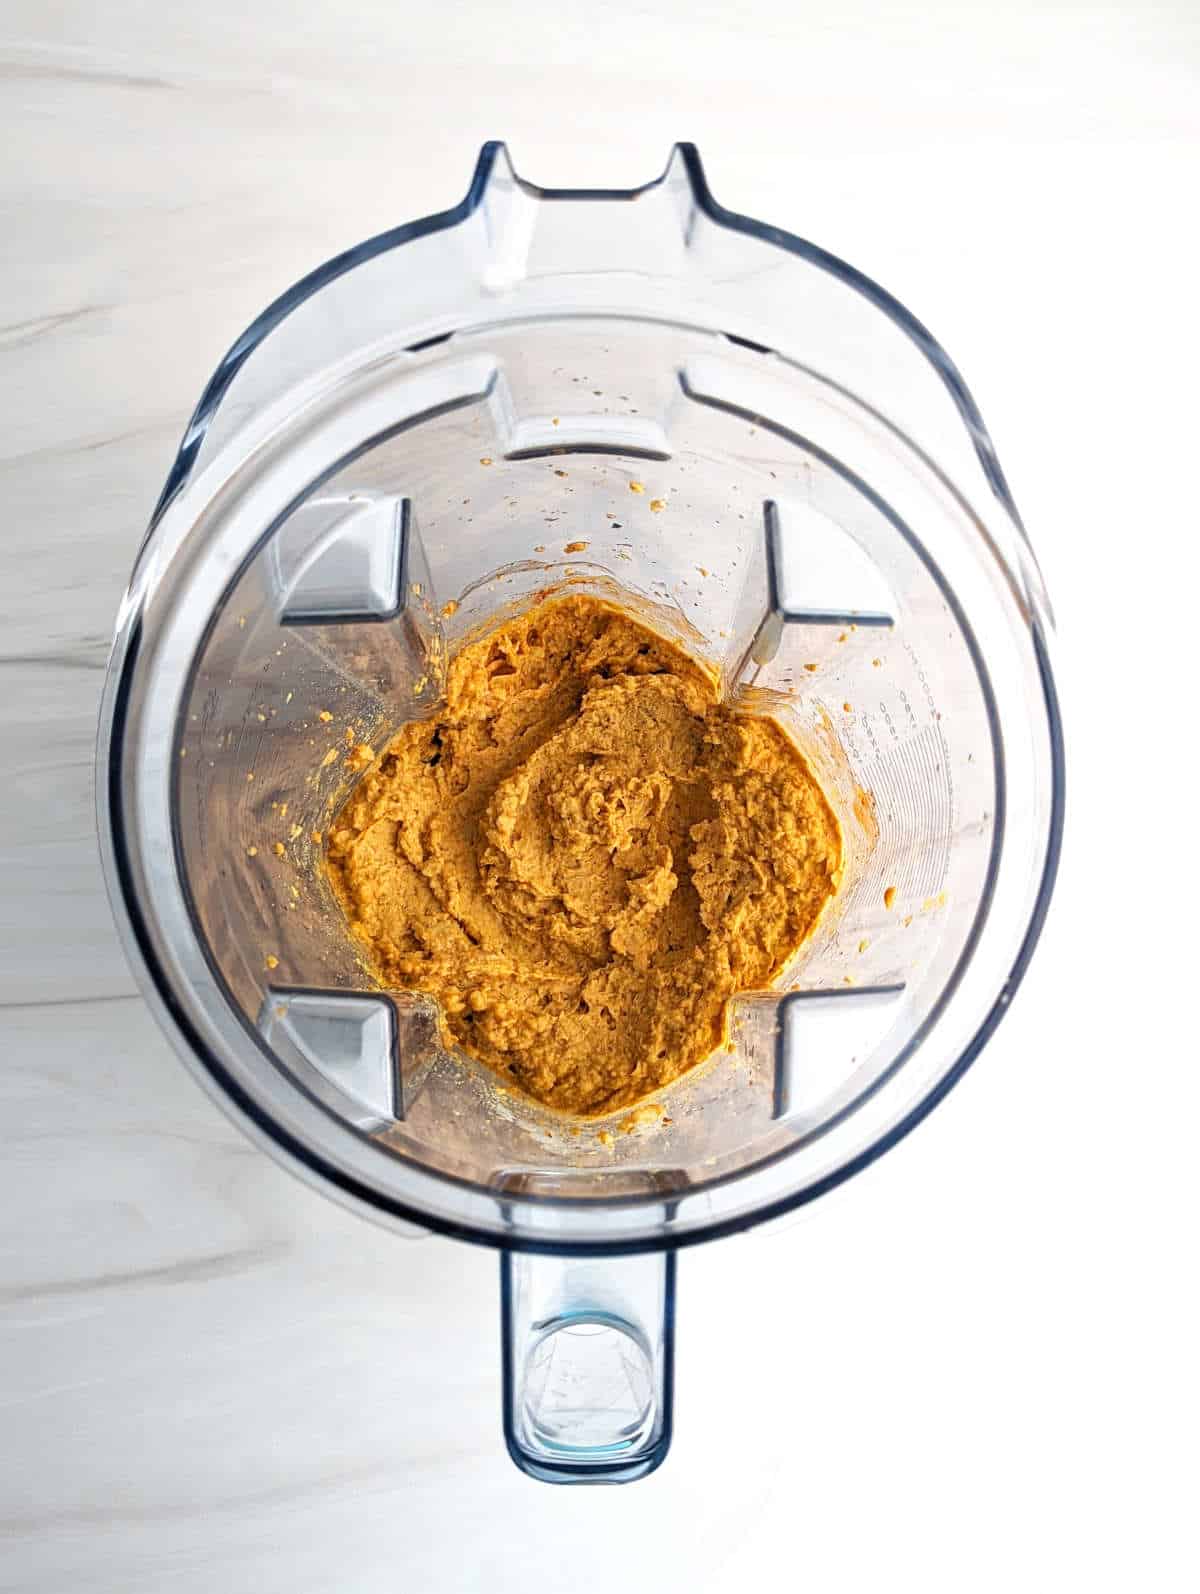 The blended buffalo chickpea dip in a blender pitcher.